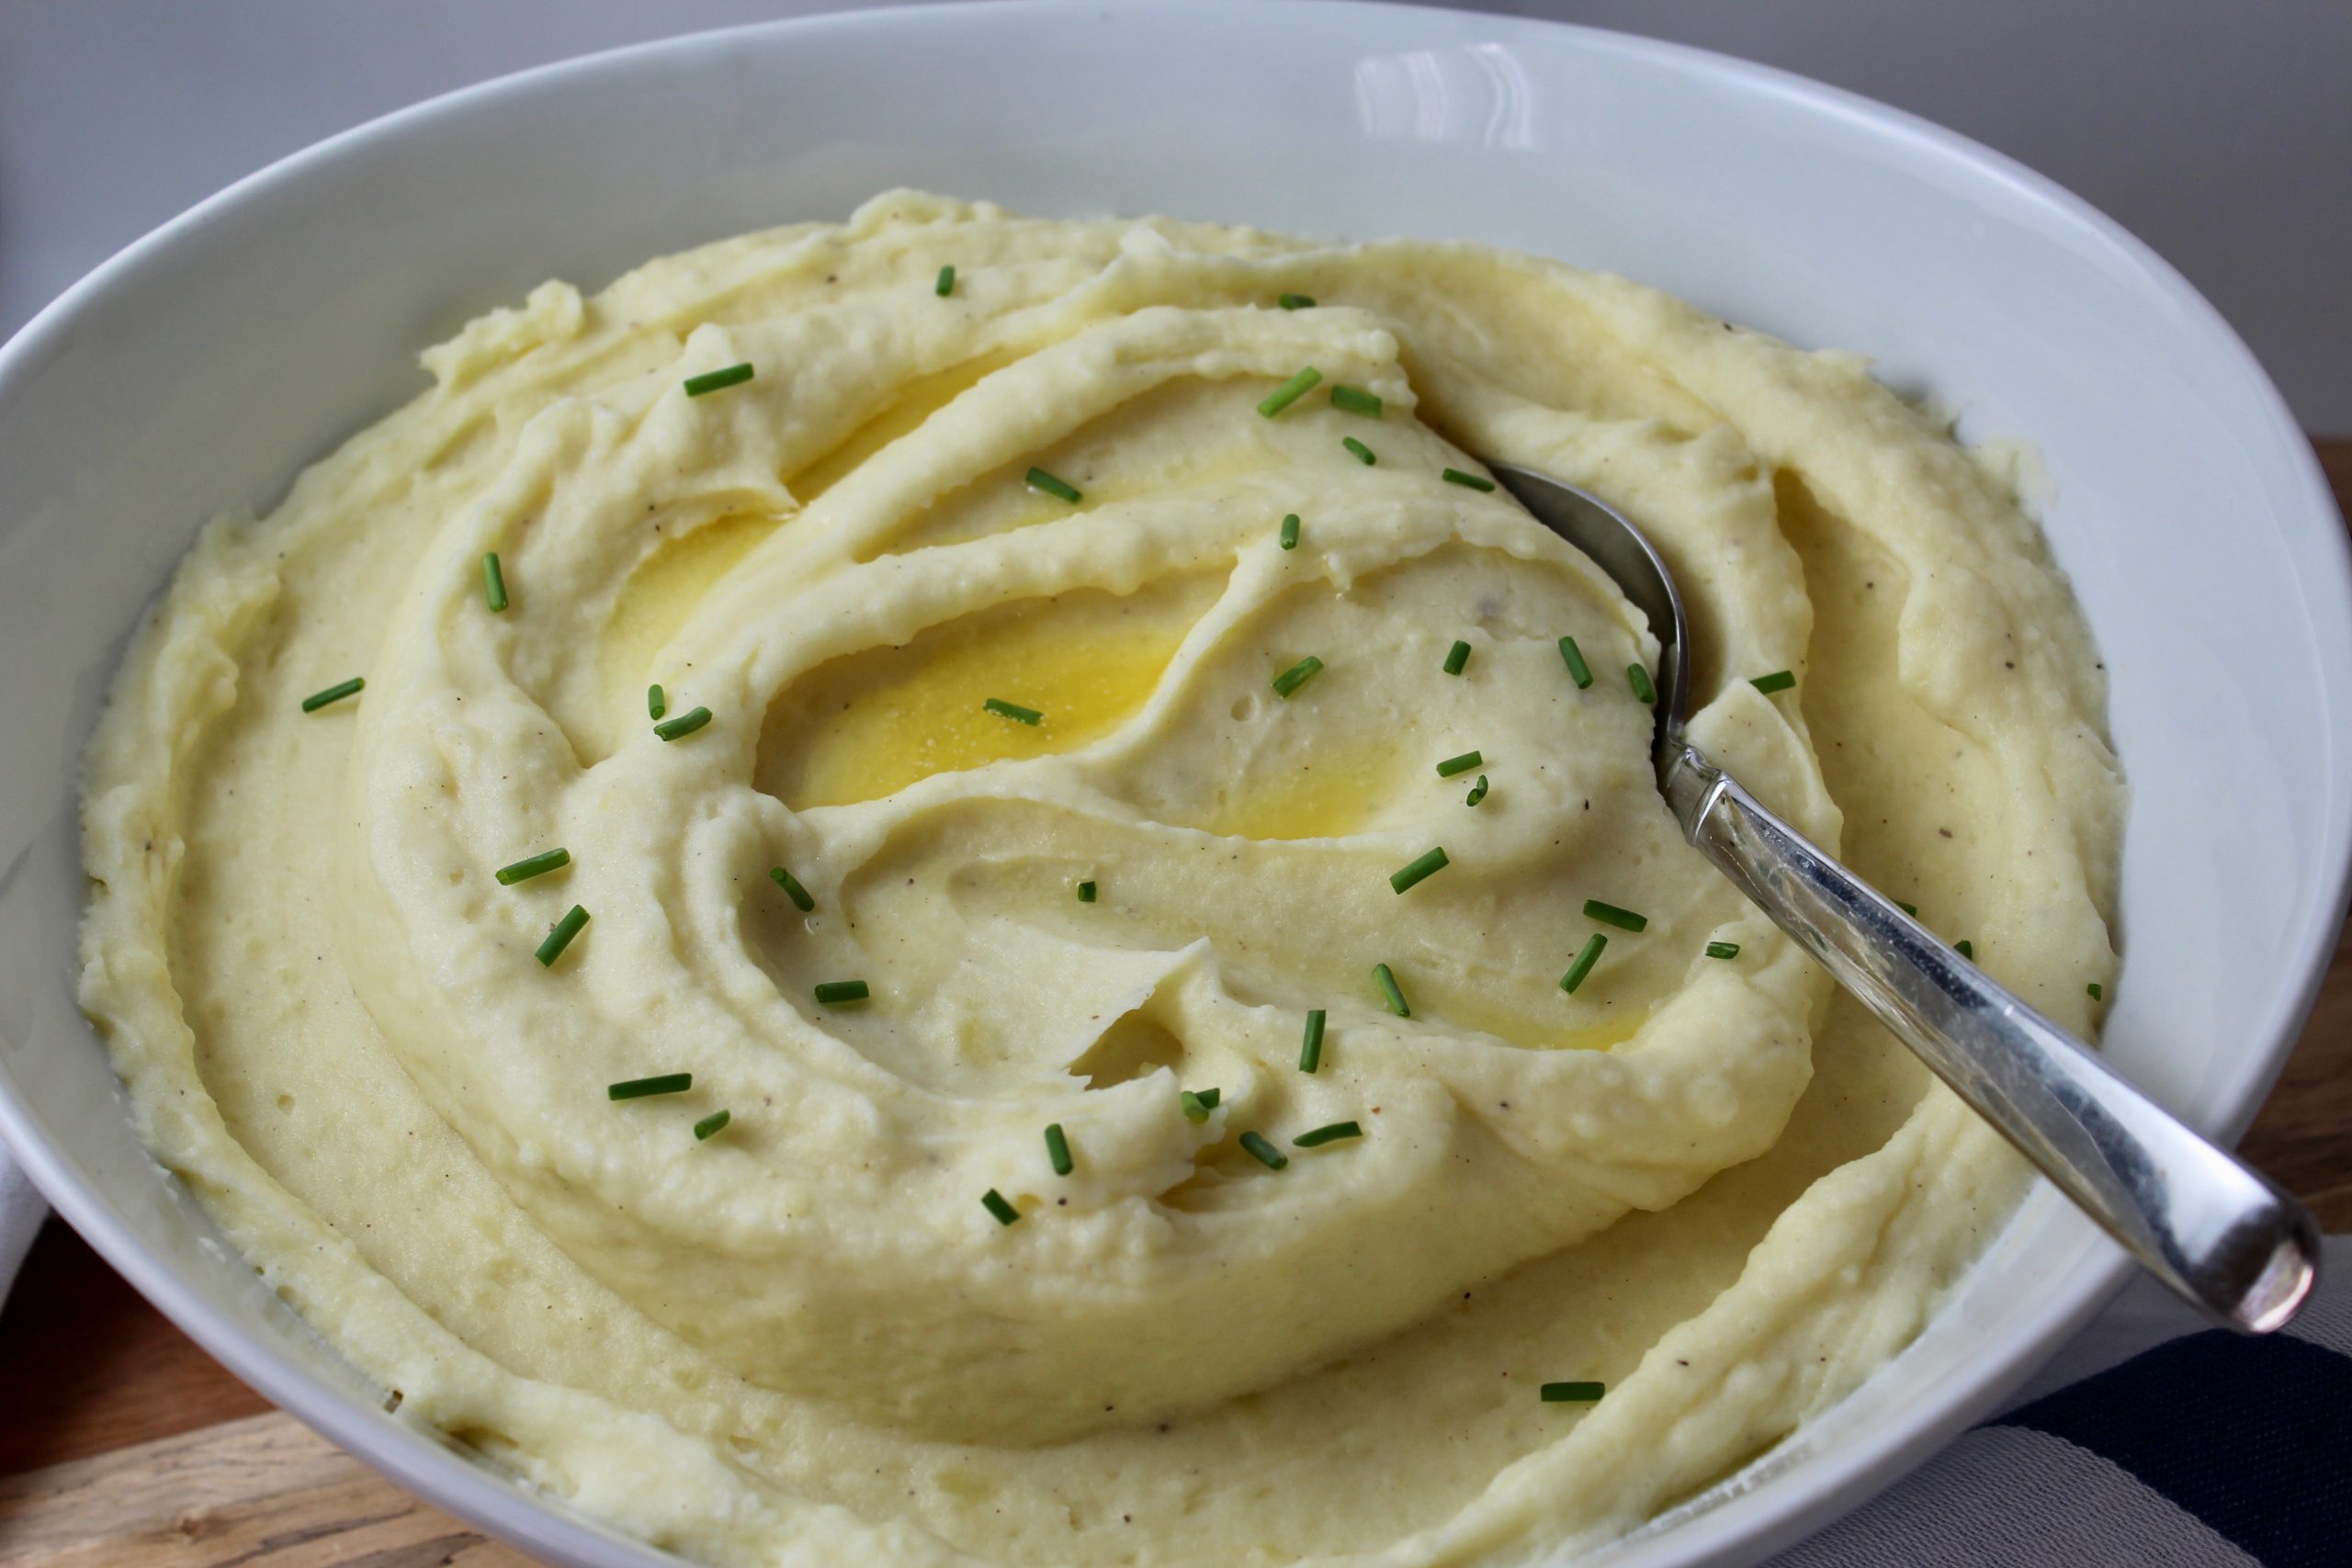 https://www.epicuricloud.com/wp-content/uploads/2019/11/Creamy-Mashed-Potatoes-in-Bowl-front-scaled.jpg